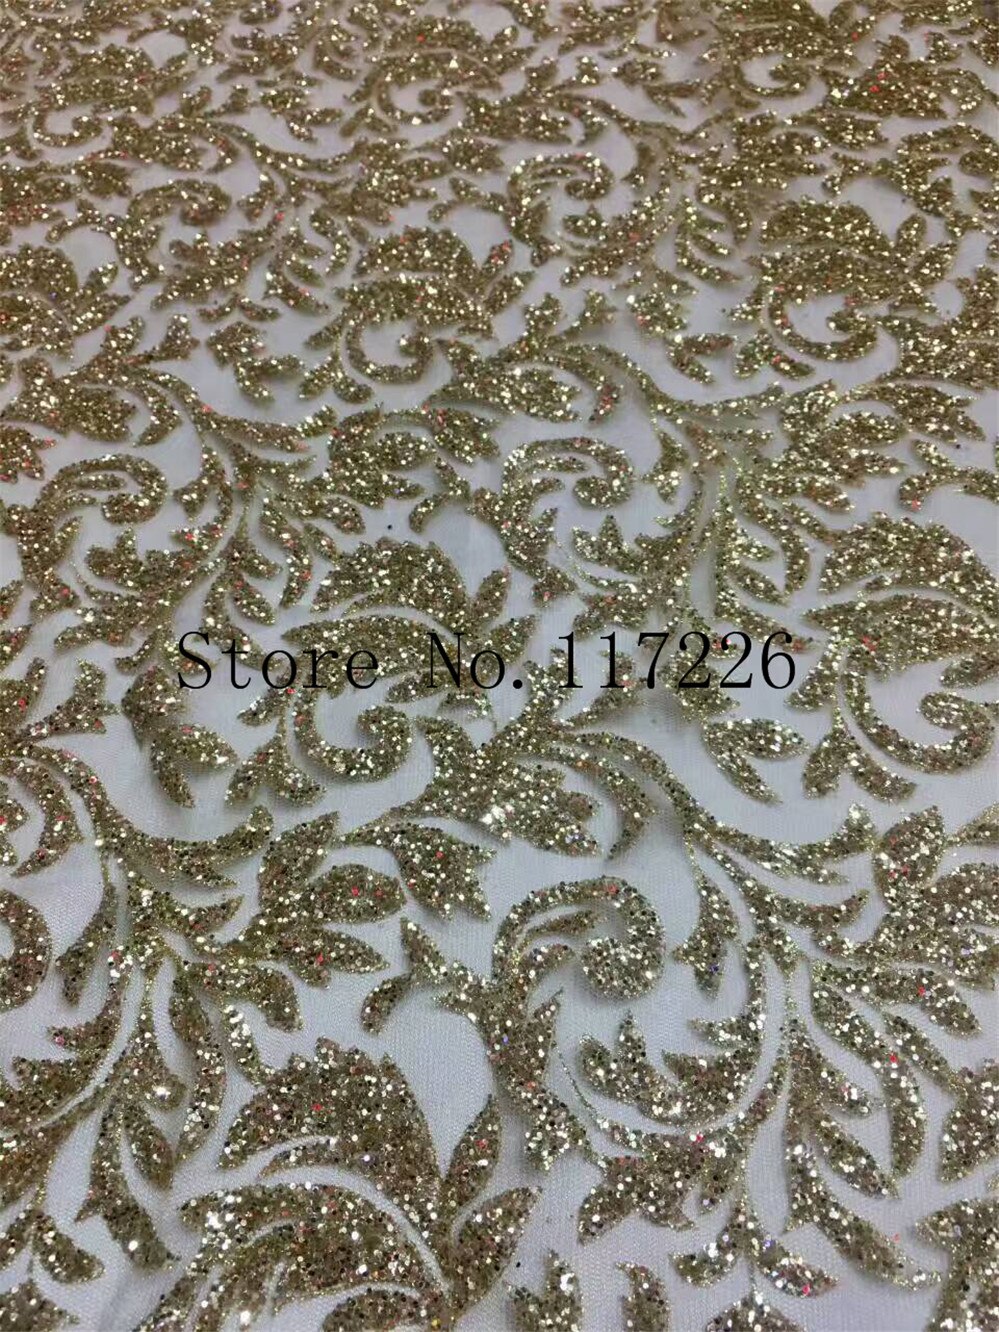 JRB-78121 Gold color glitter mesh african indian lace fabric for party wedding /evening dress